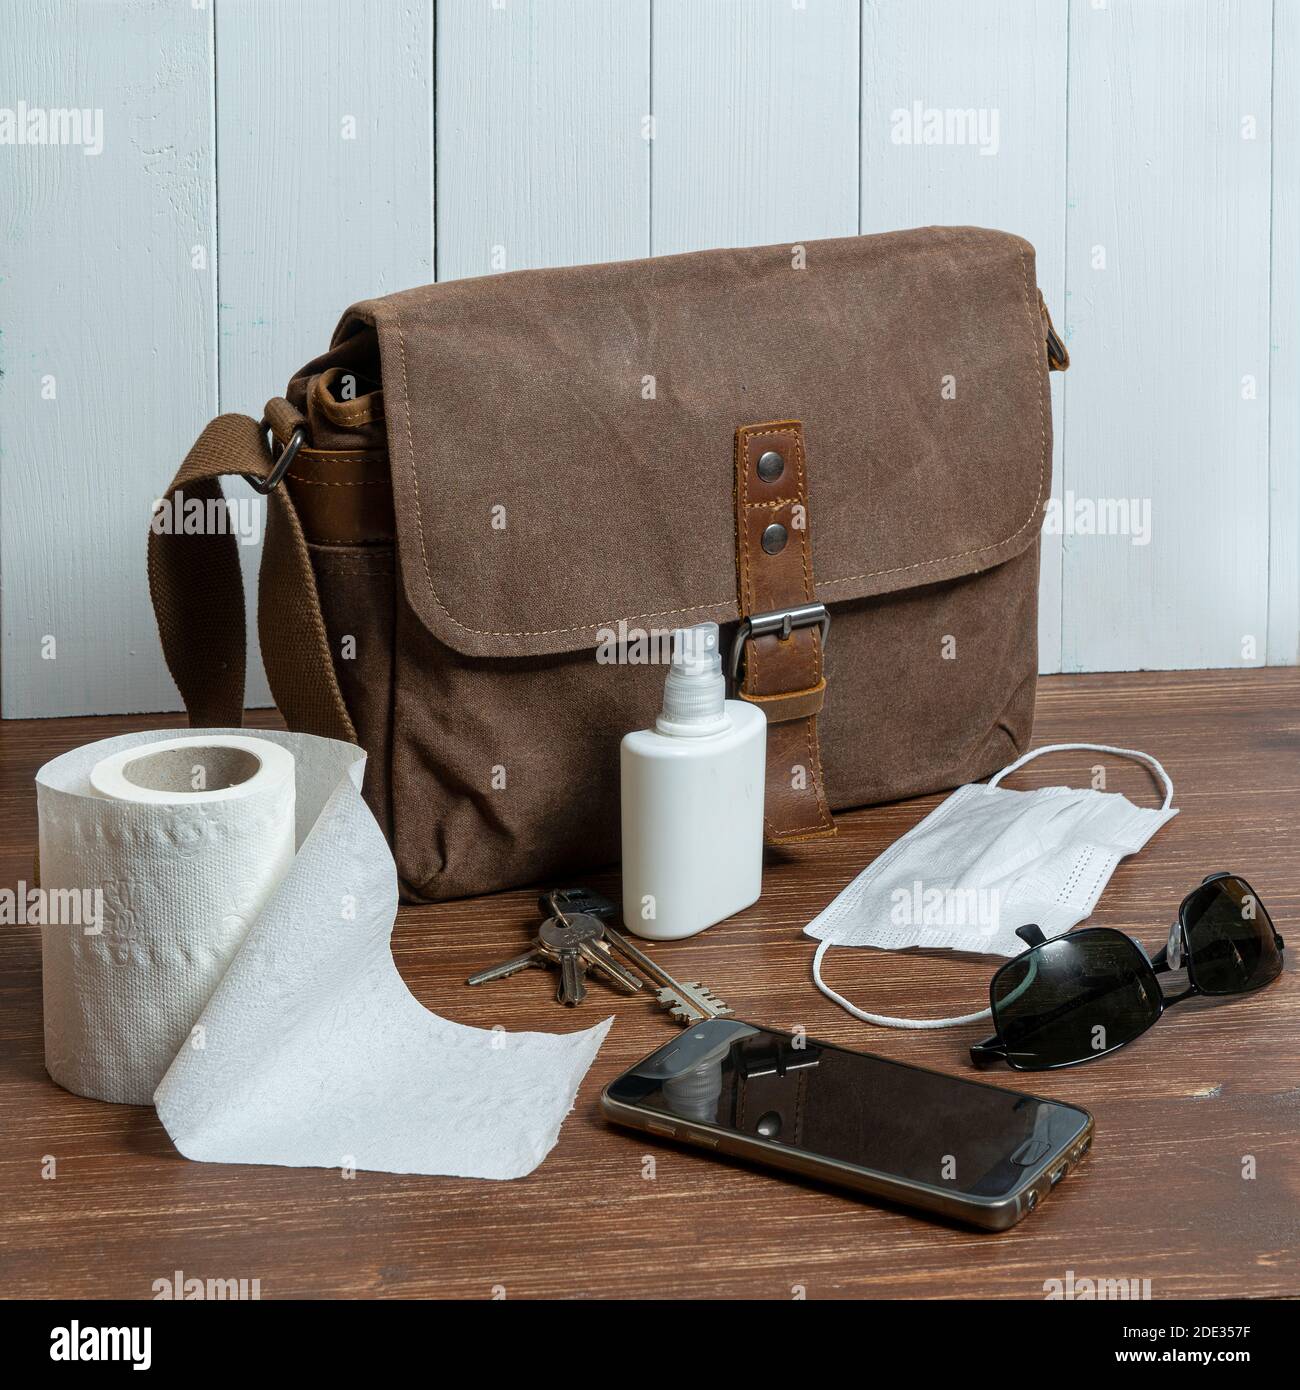 a bag and some objects and a roll of toilet paper on a wooden table Stock Photo